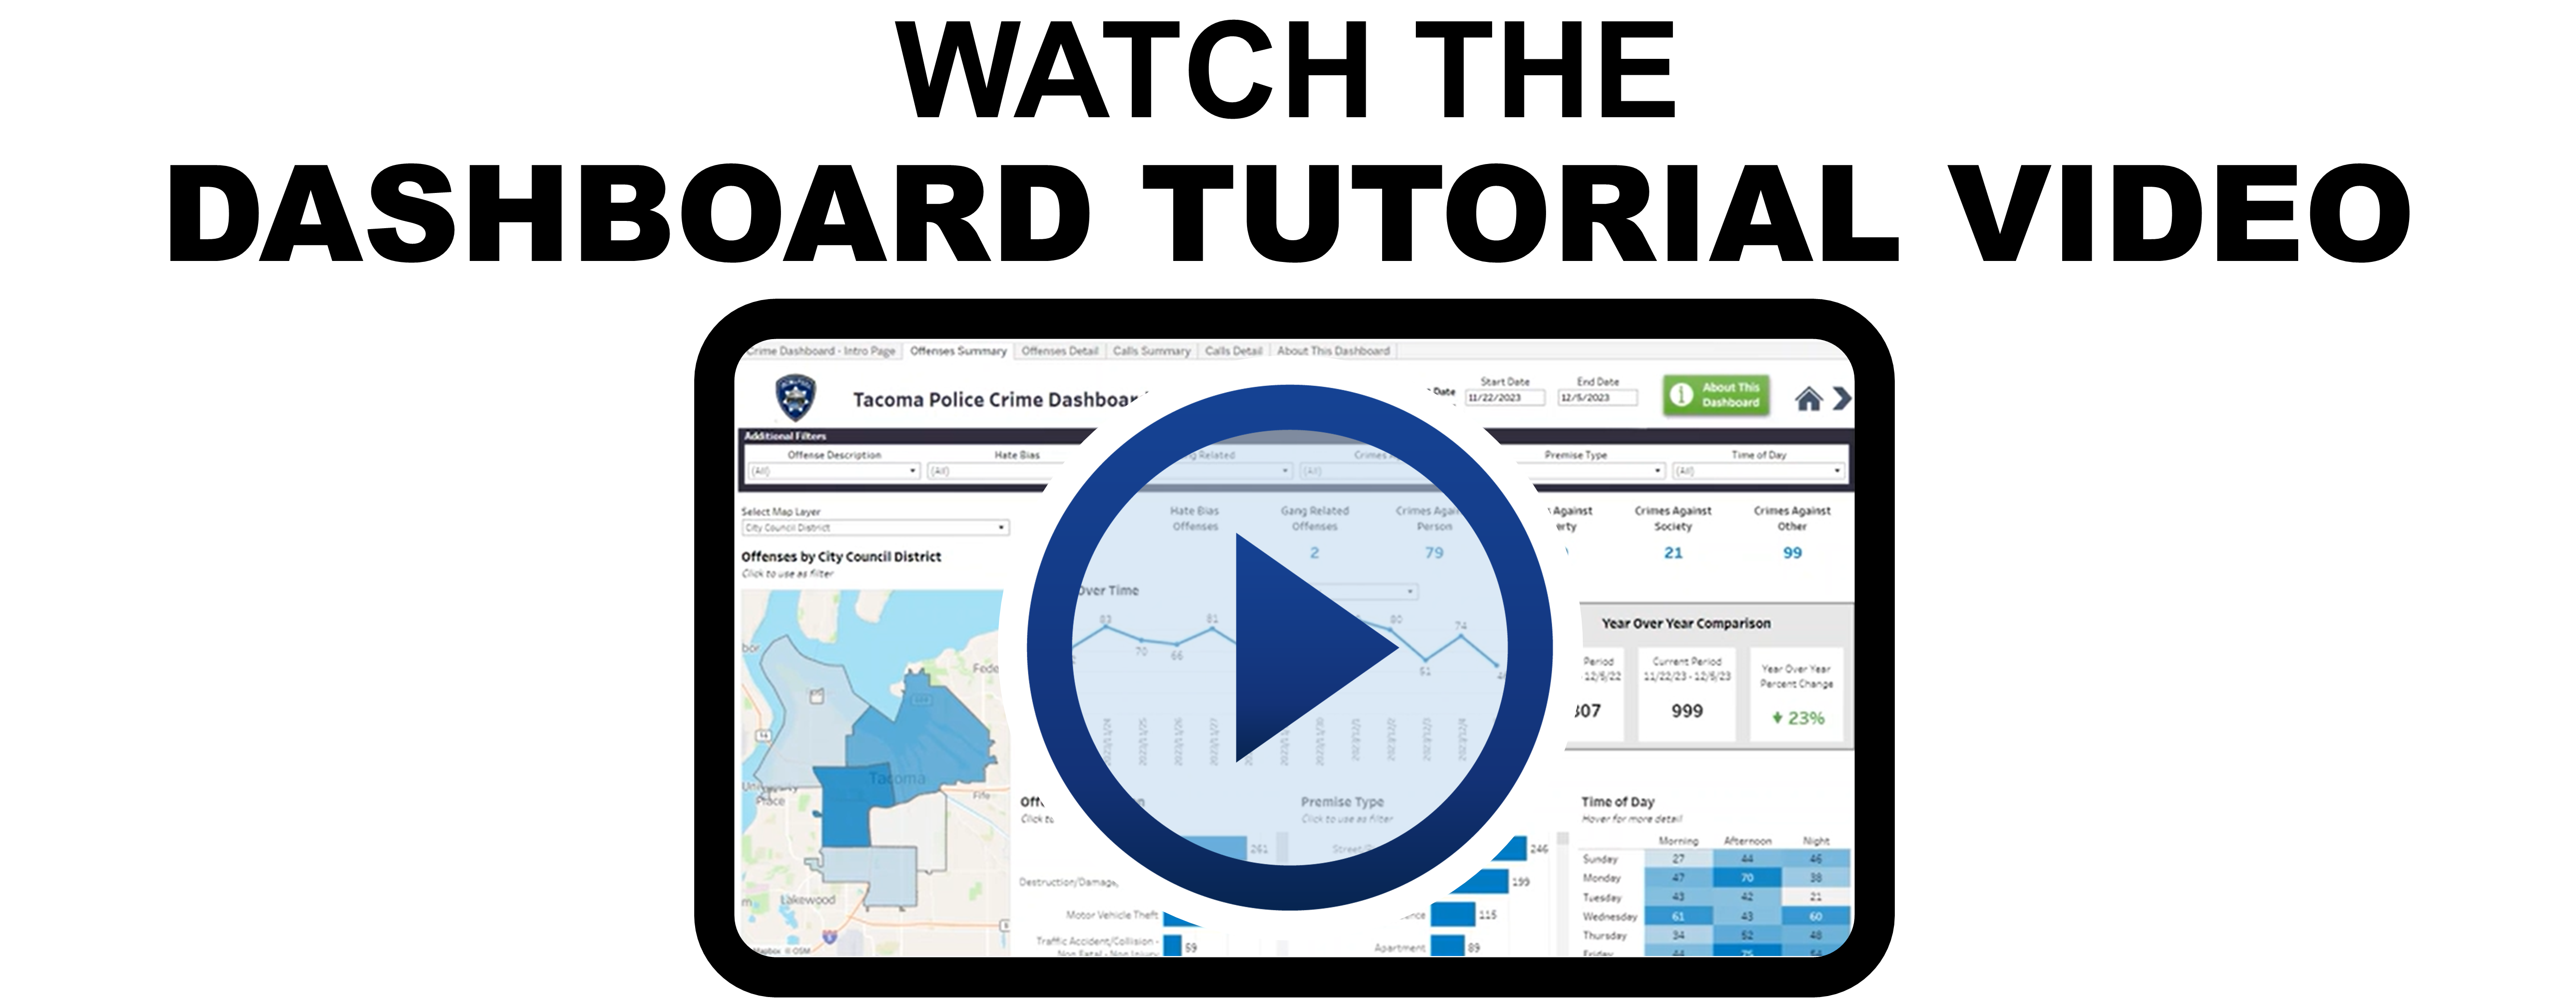 watch the TPD crime dashboard tutorial video